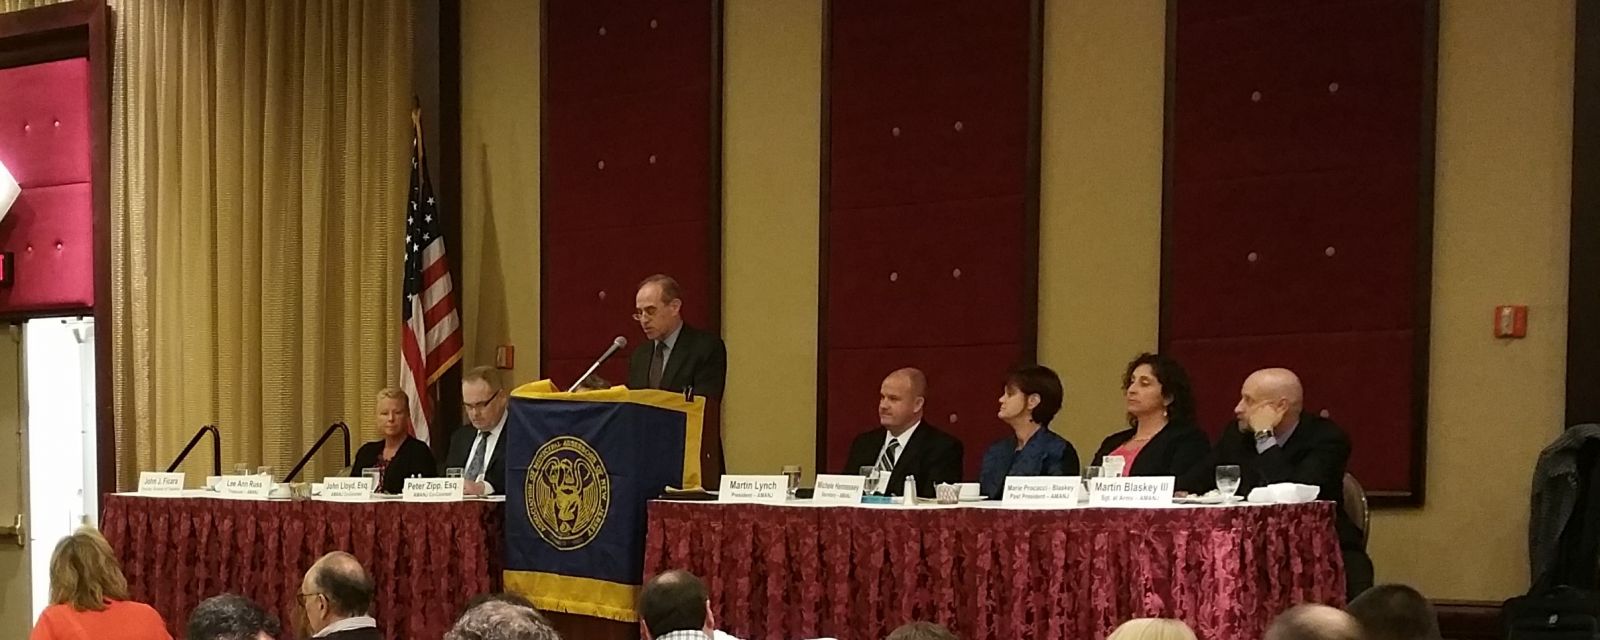 Acting Director of the Division of Taxation, John Ficara (center). Executive board of the Association of Municipal Assessors of New Jersey. 